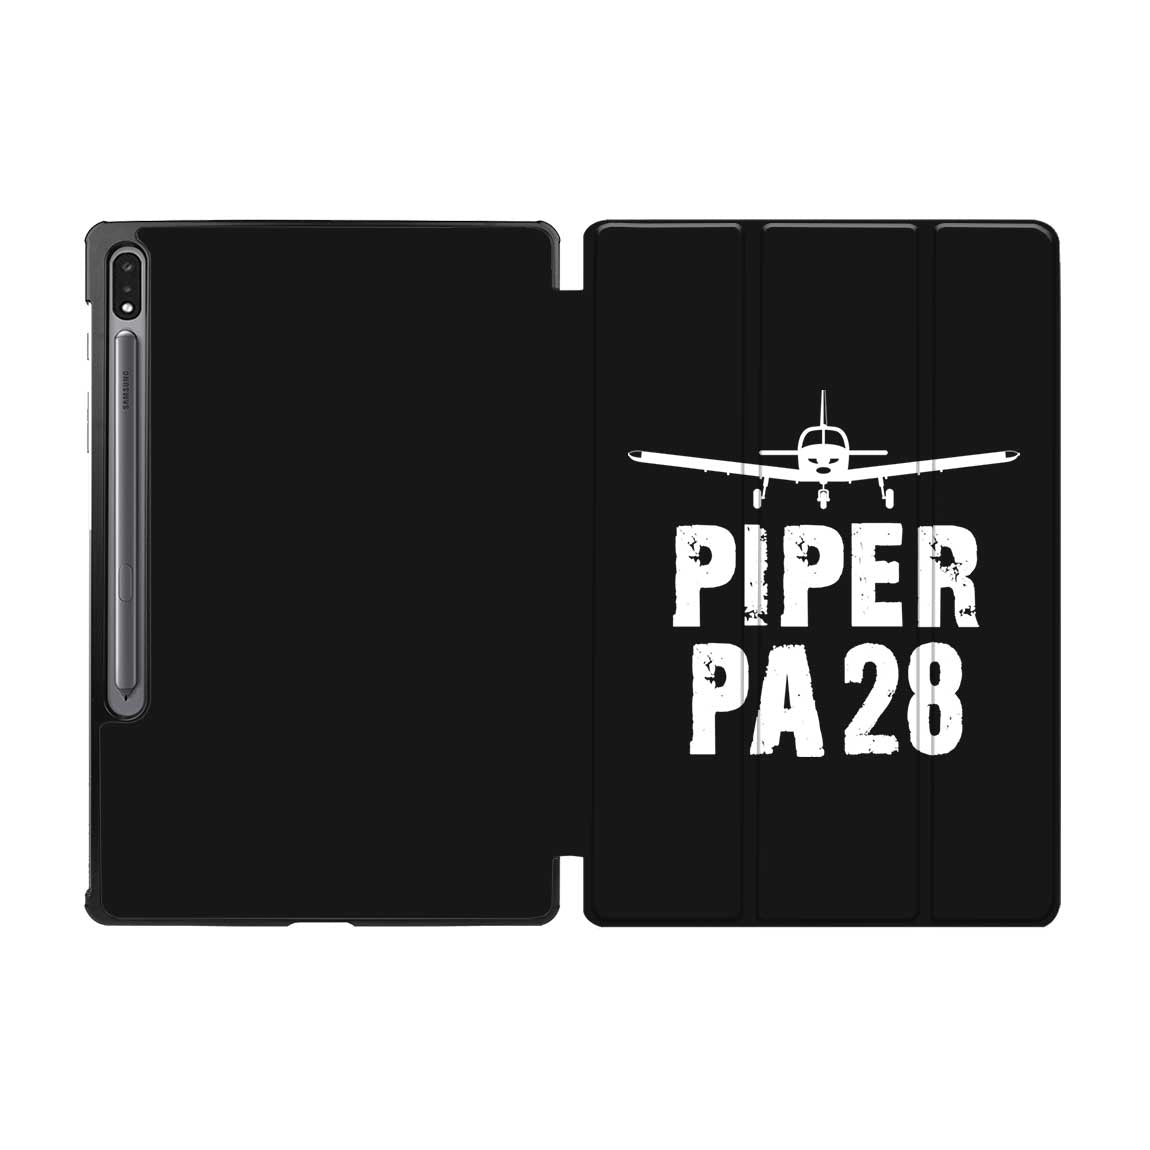 Piper PA28 & Plane Designed Samsung Tablet Cases